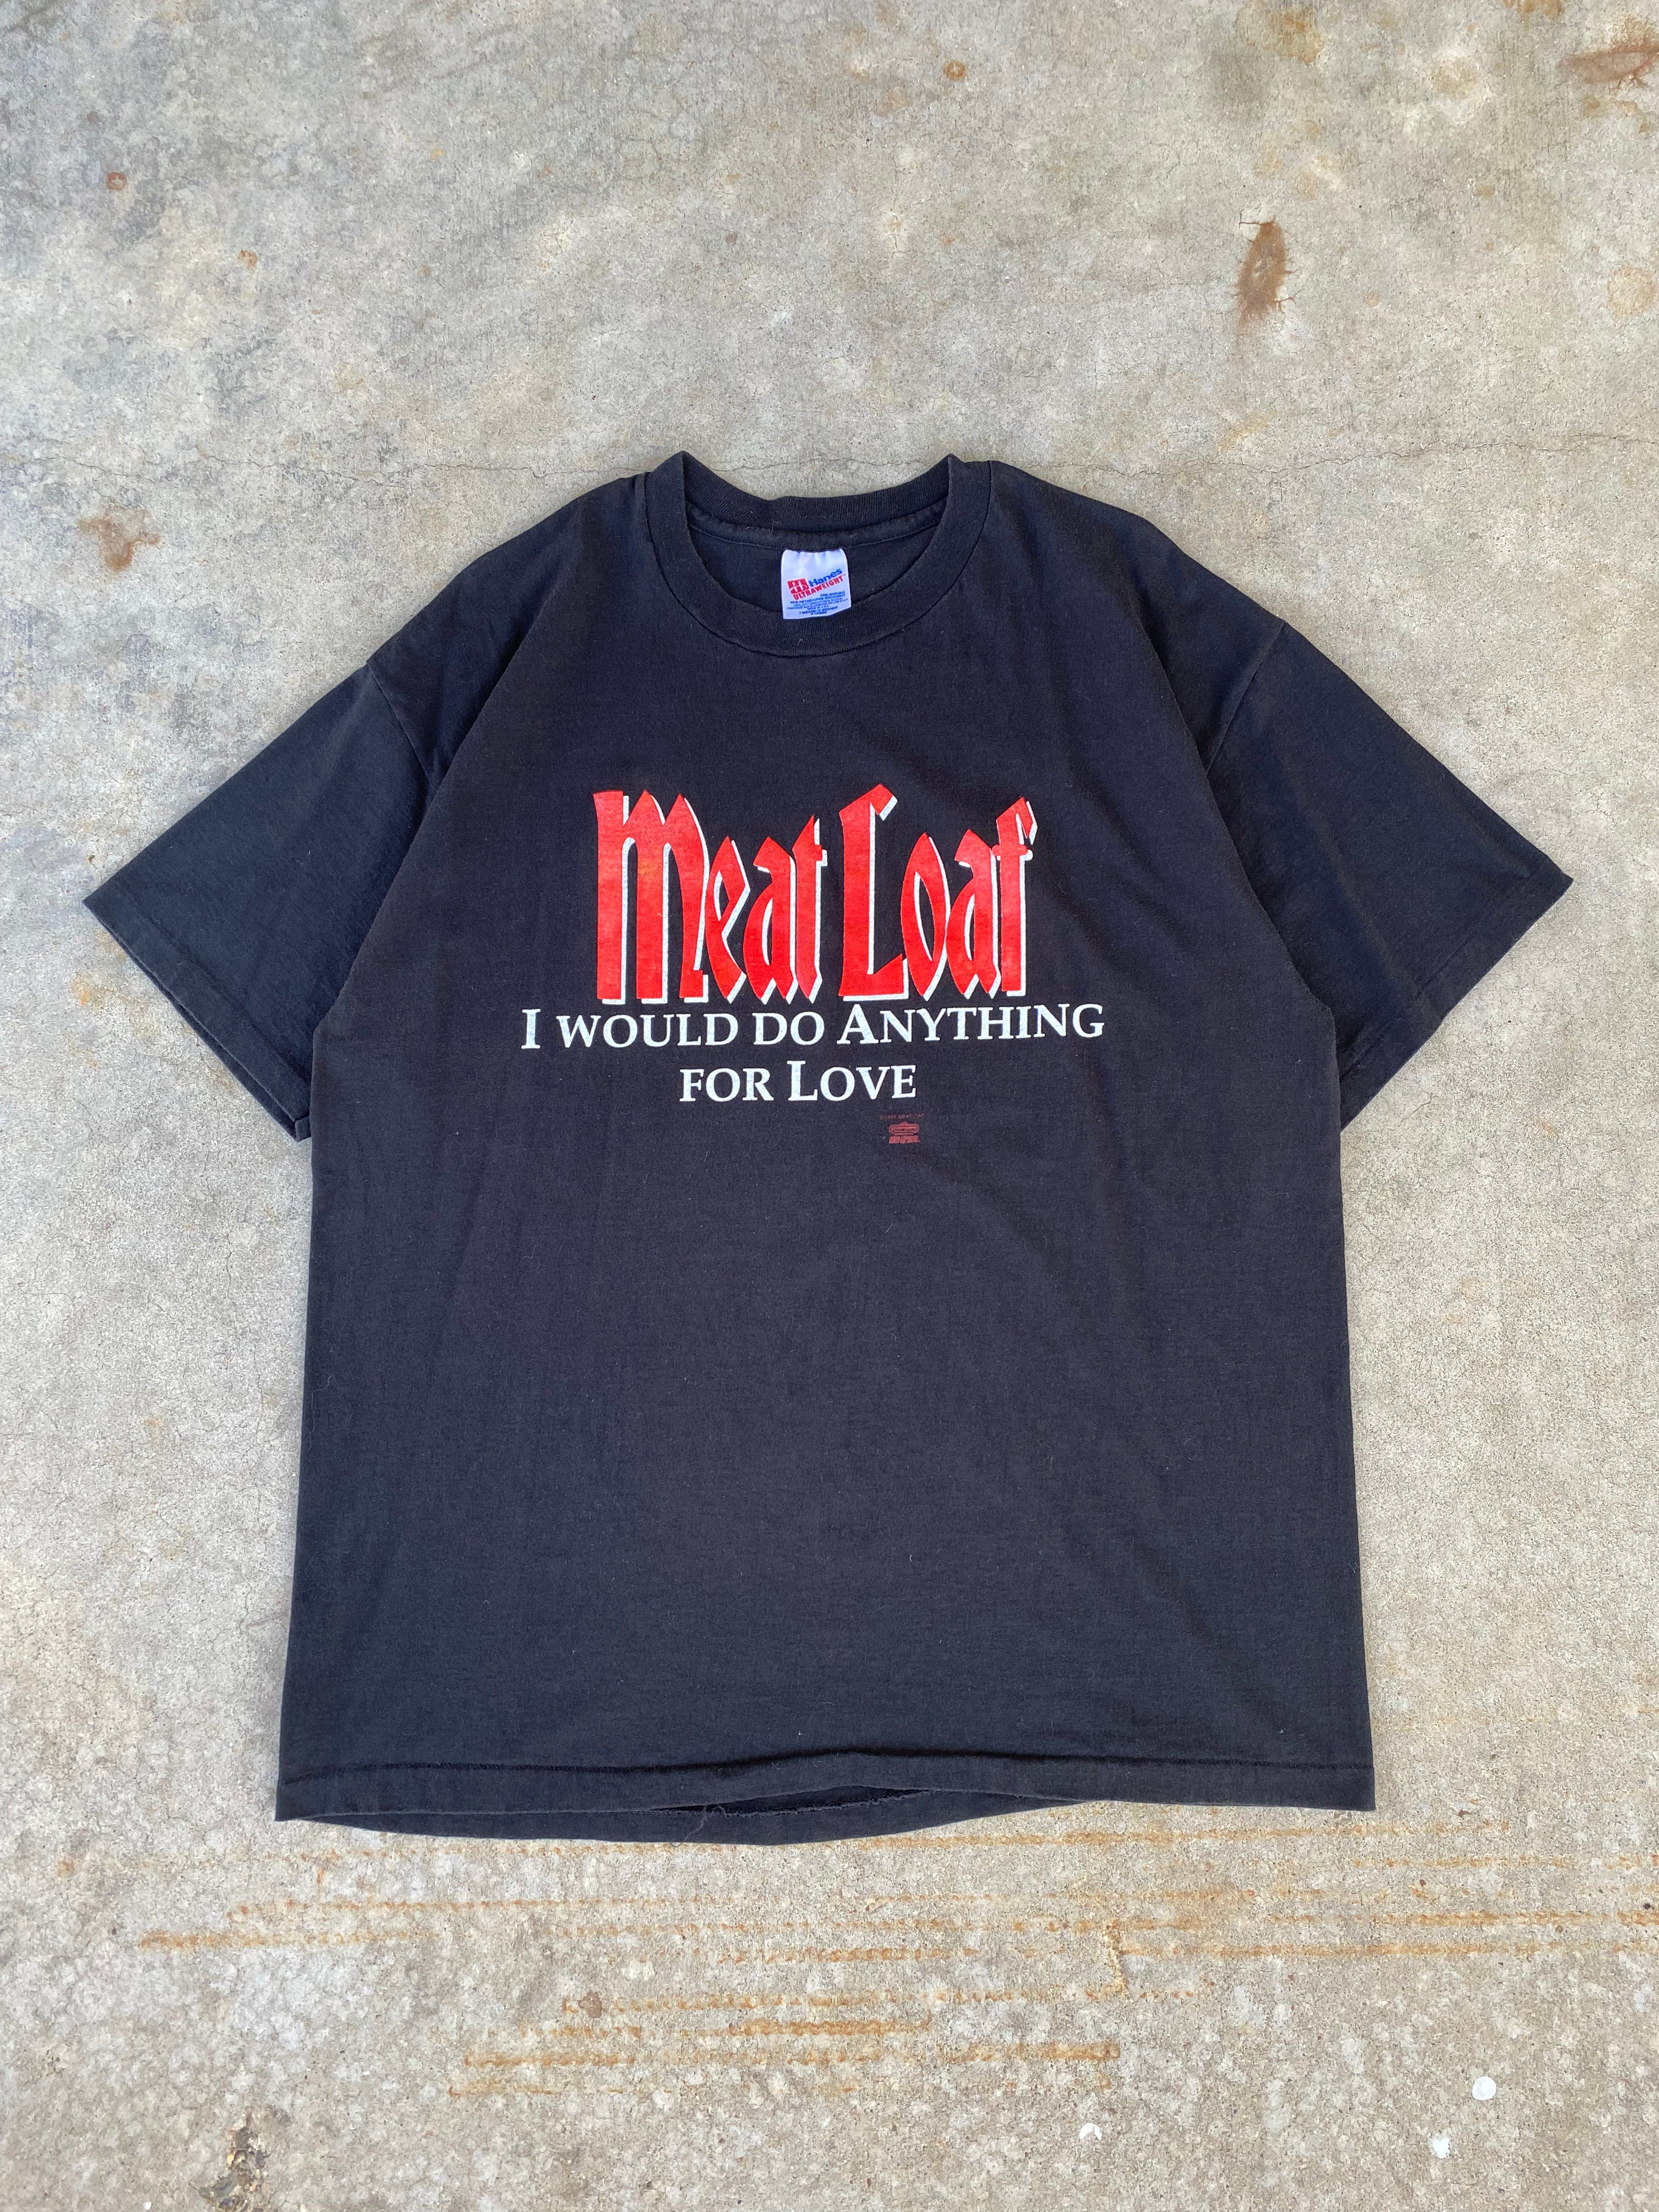 1993 Meat Loaf “I Would Do Anything For Love” T-Shirt (XL)